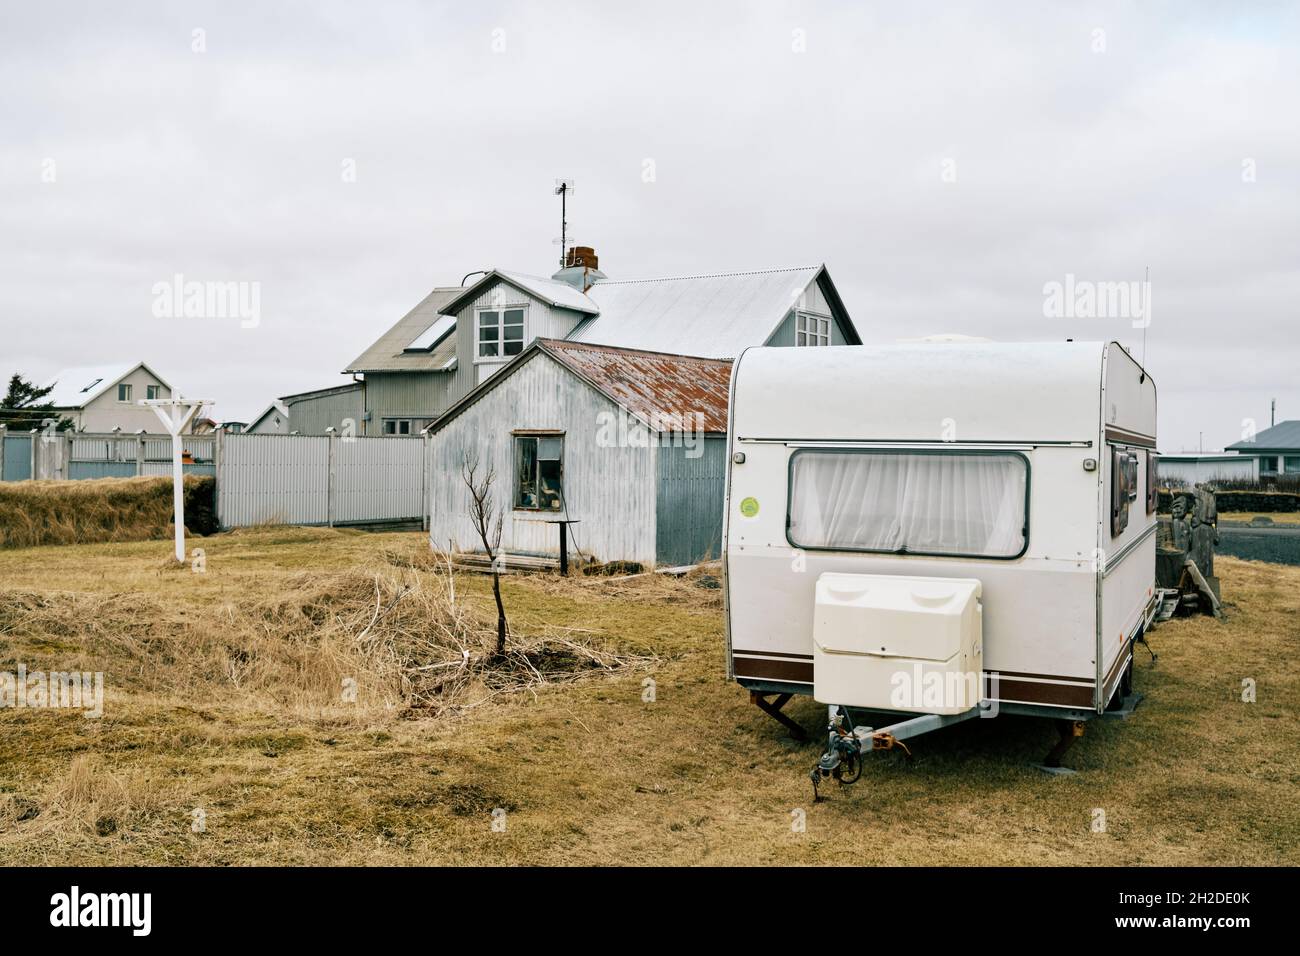 Camping trailer parked on lawn against houses and old barn under cloudy sky in fall season in Iceland Stock Photo